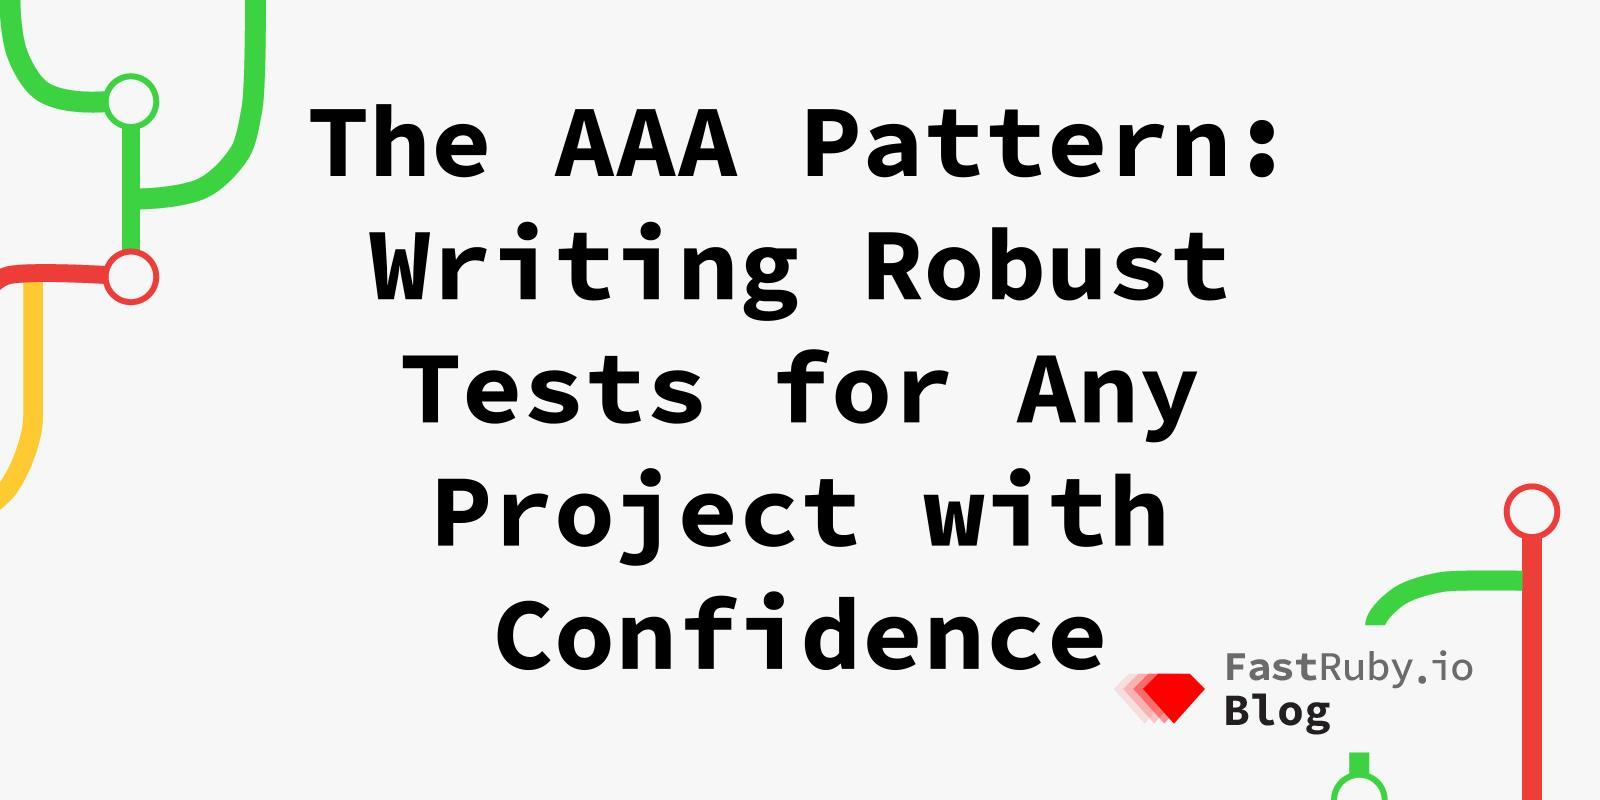 The AAA Pattern: Writing Robust Tests for Any Project with Confidence